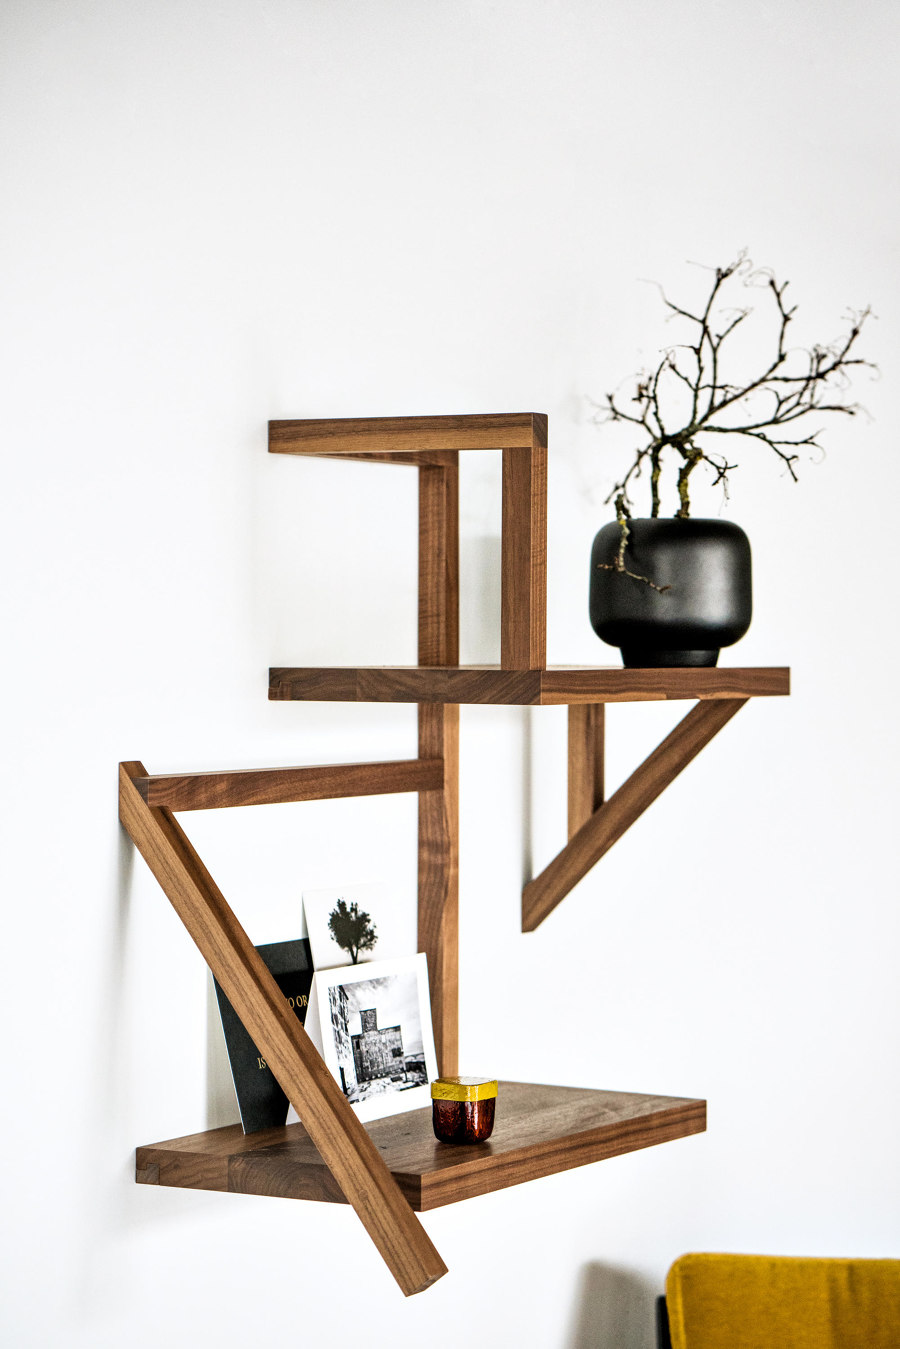 Working with wood – ten examples of solid wood furniture | Novedades